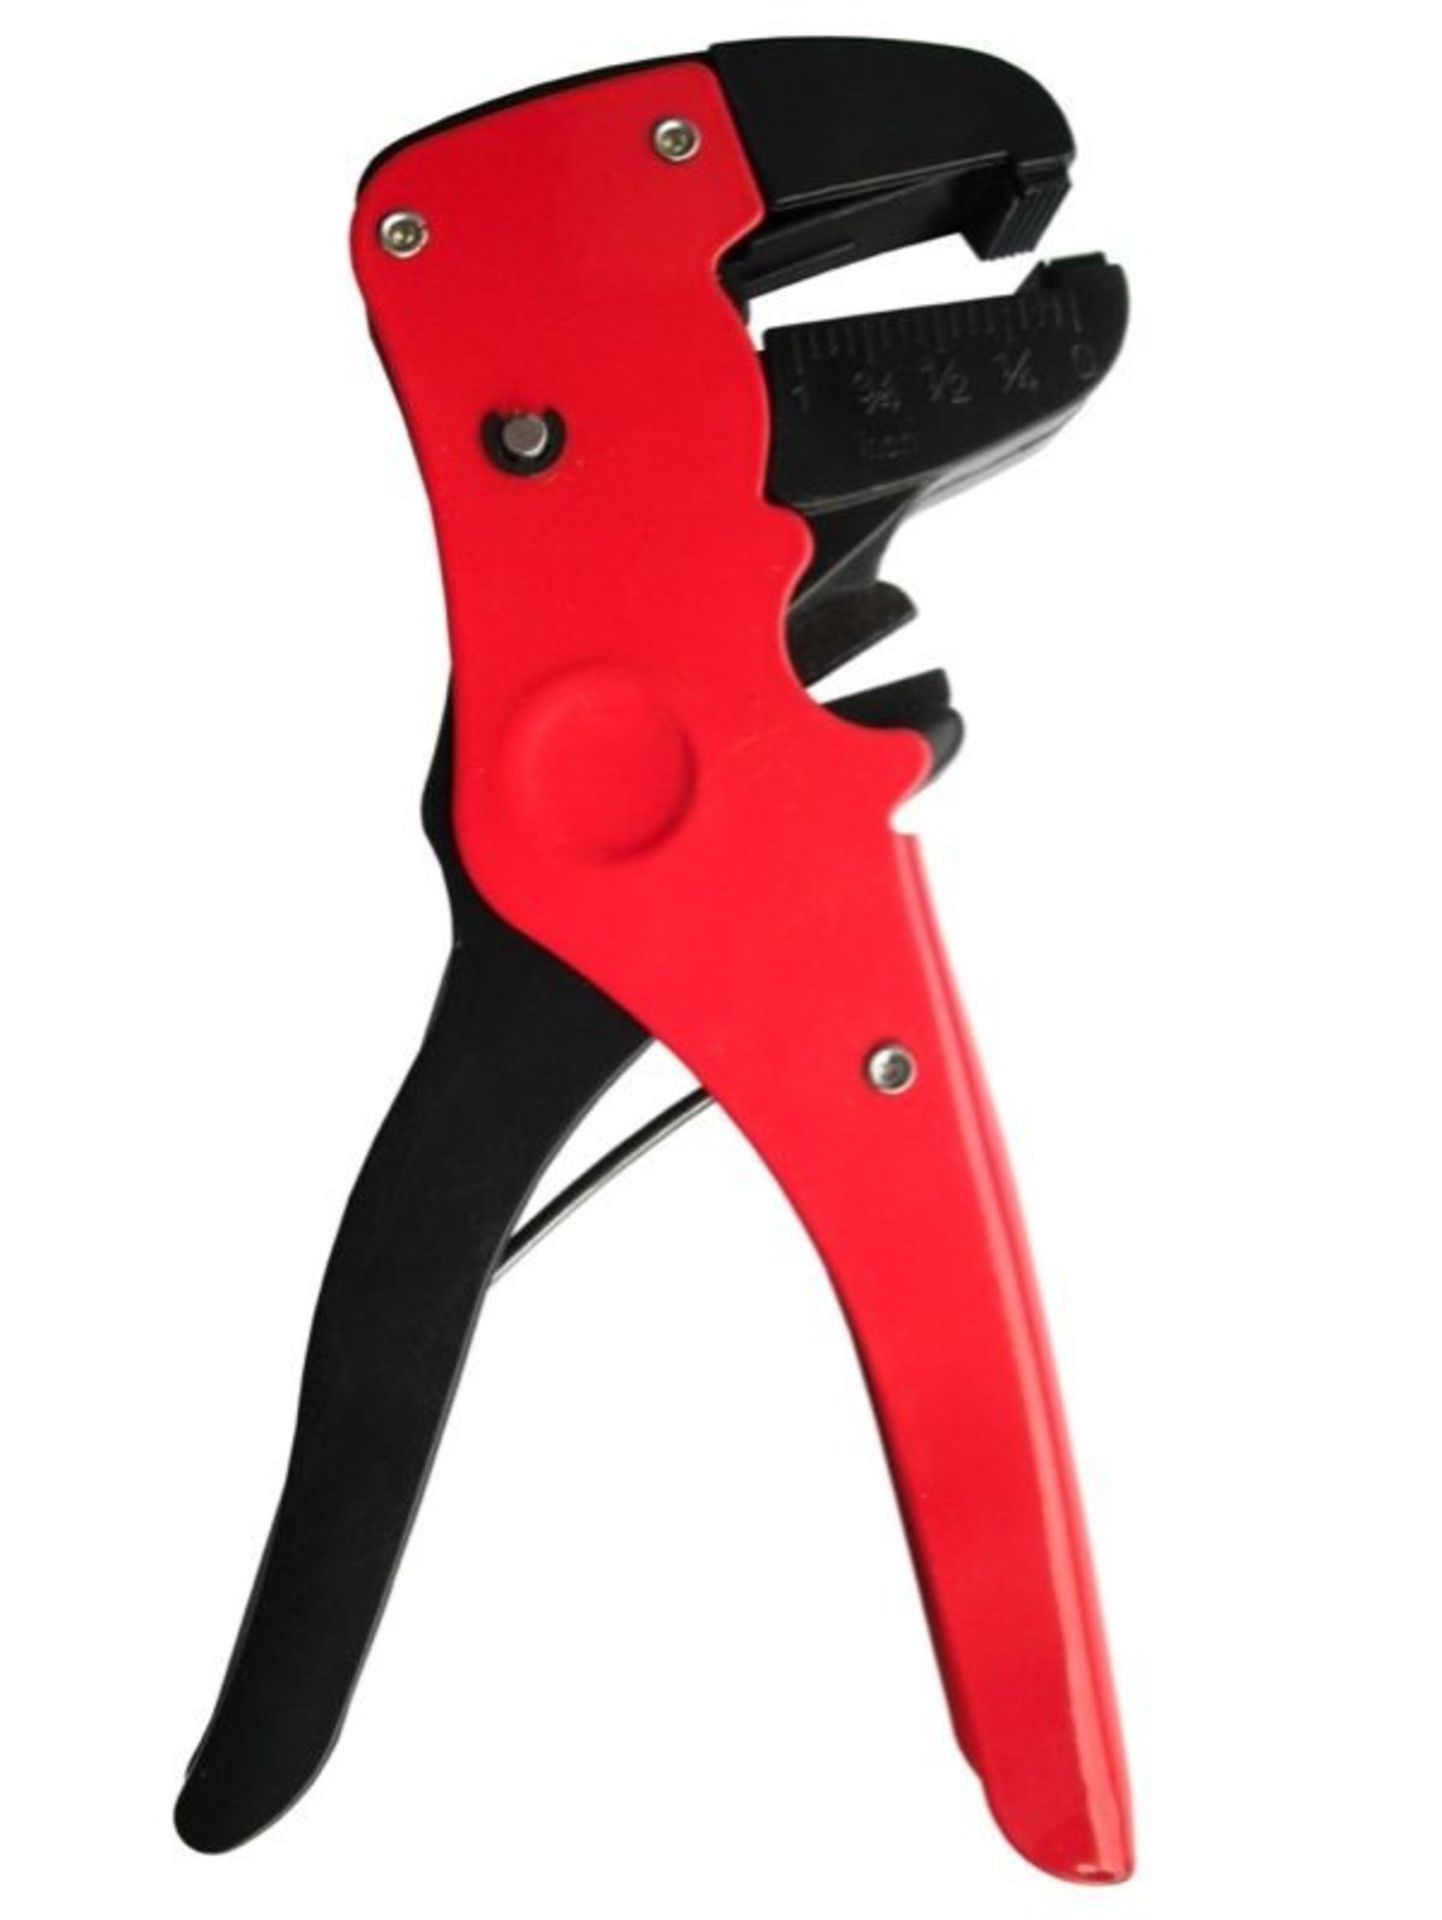 V Brand New Automatic Wire Stripper And Cable Cutter For 0.5 mm to 4.0 mm Wire - Suitable For